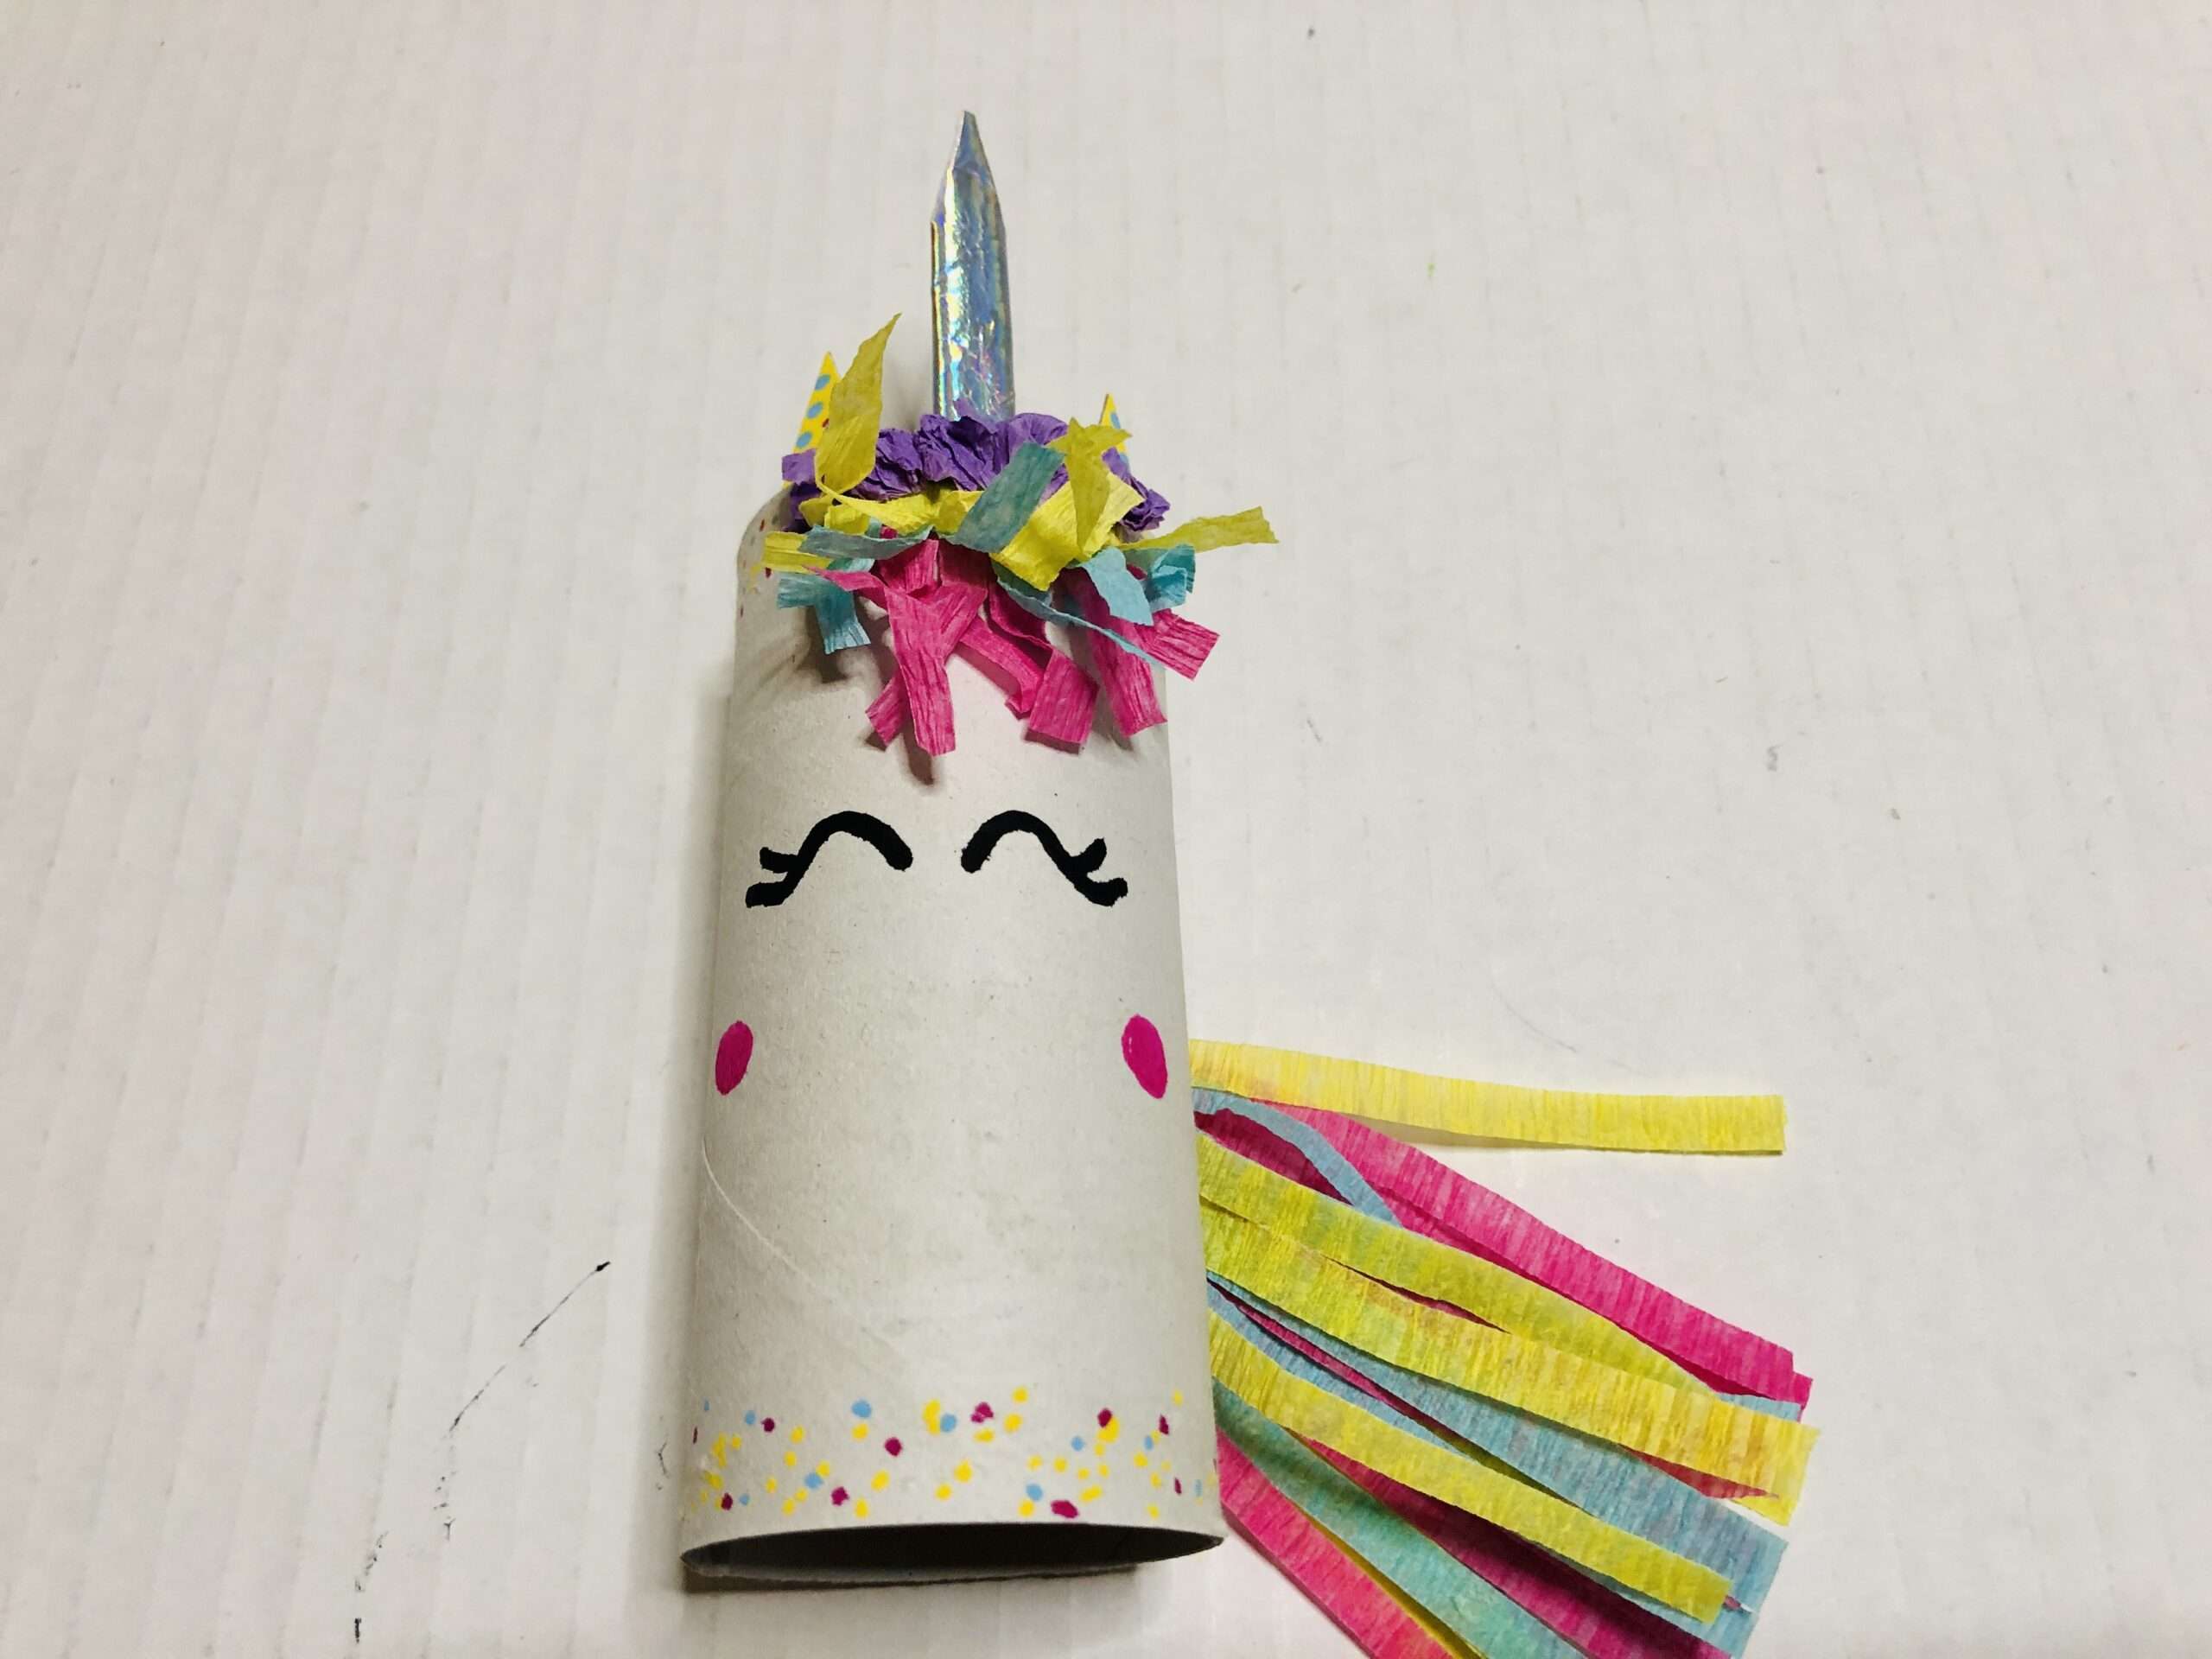 Unicorn Craft Made with Toilet Paper Rolls